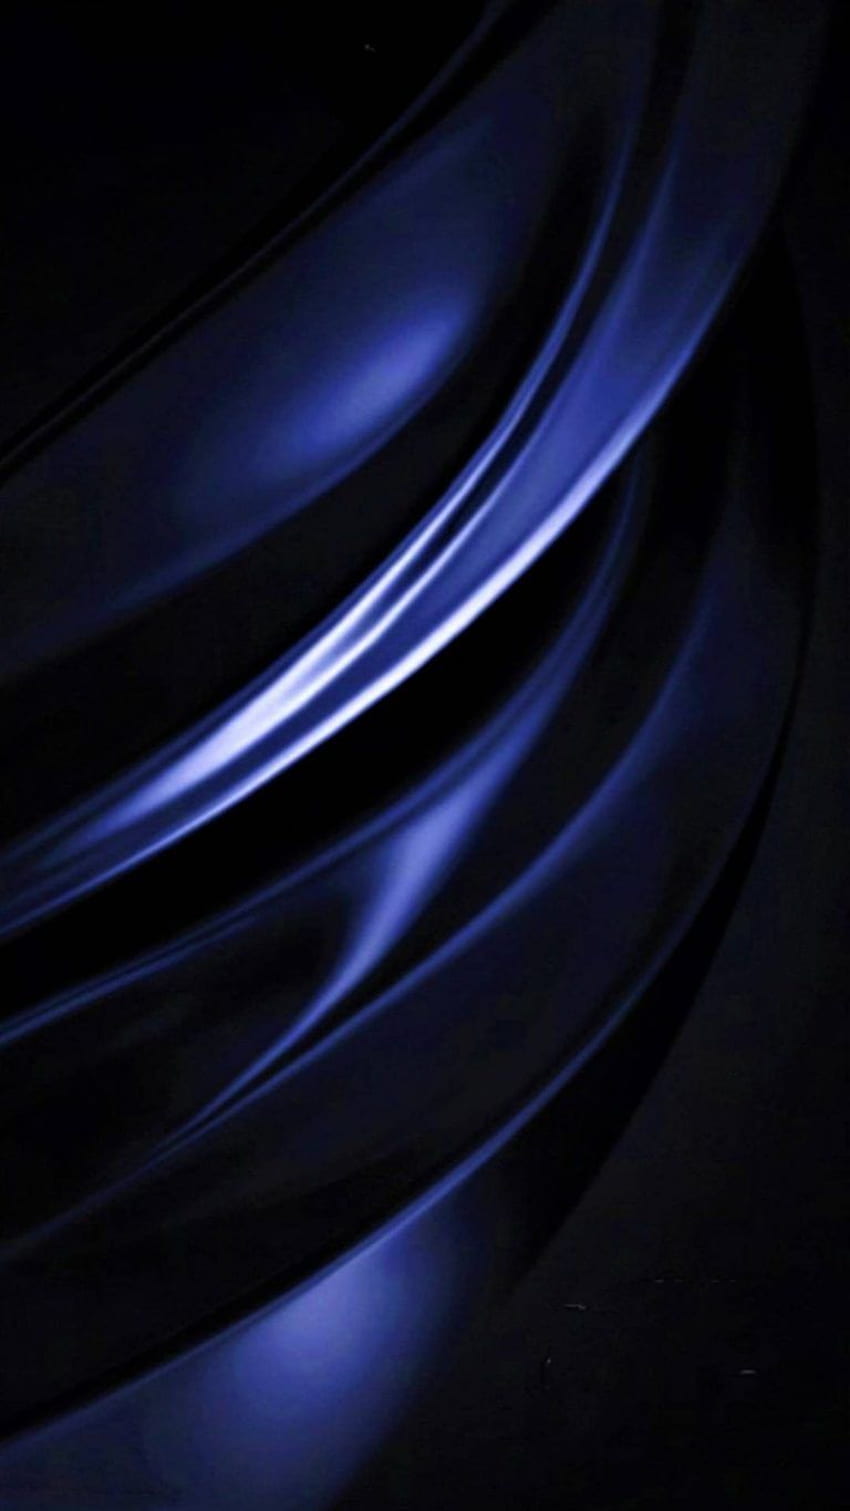 Dark Black And Blue Amoled Wallpapers - Wallpaper Cave